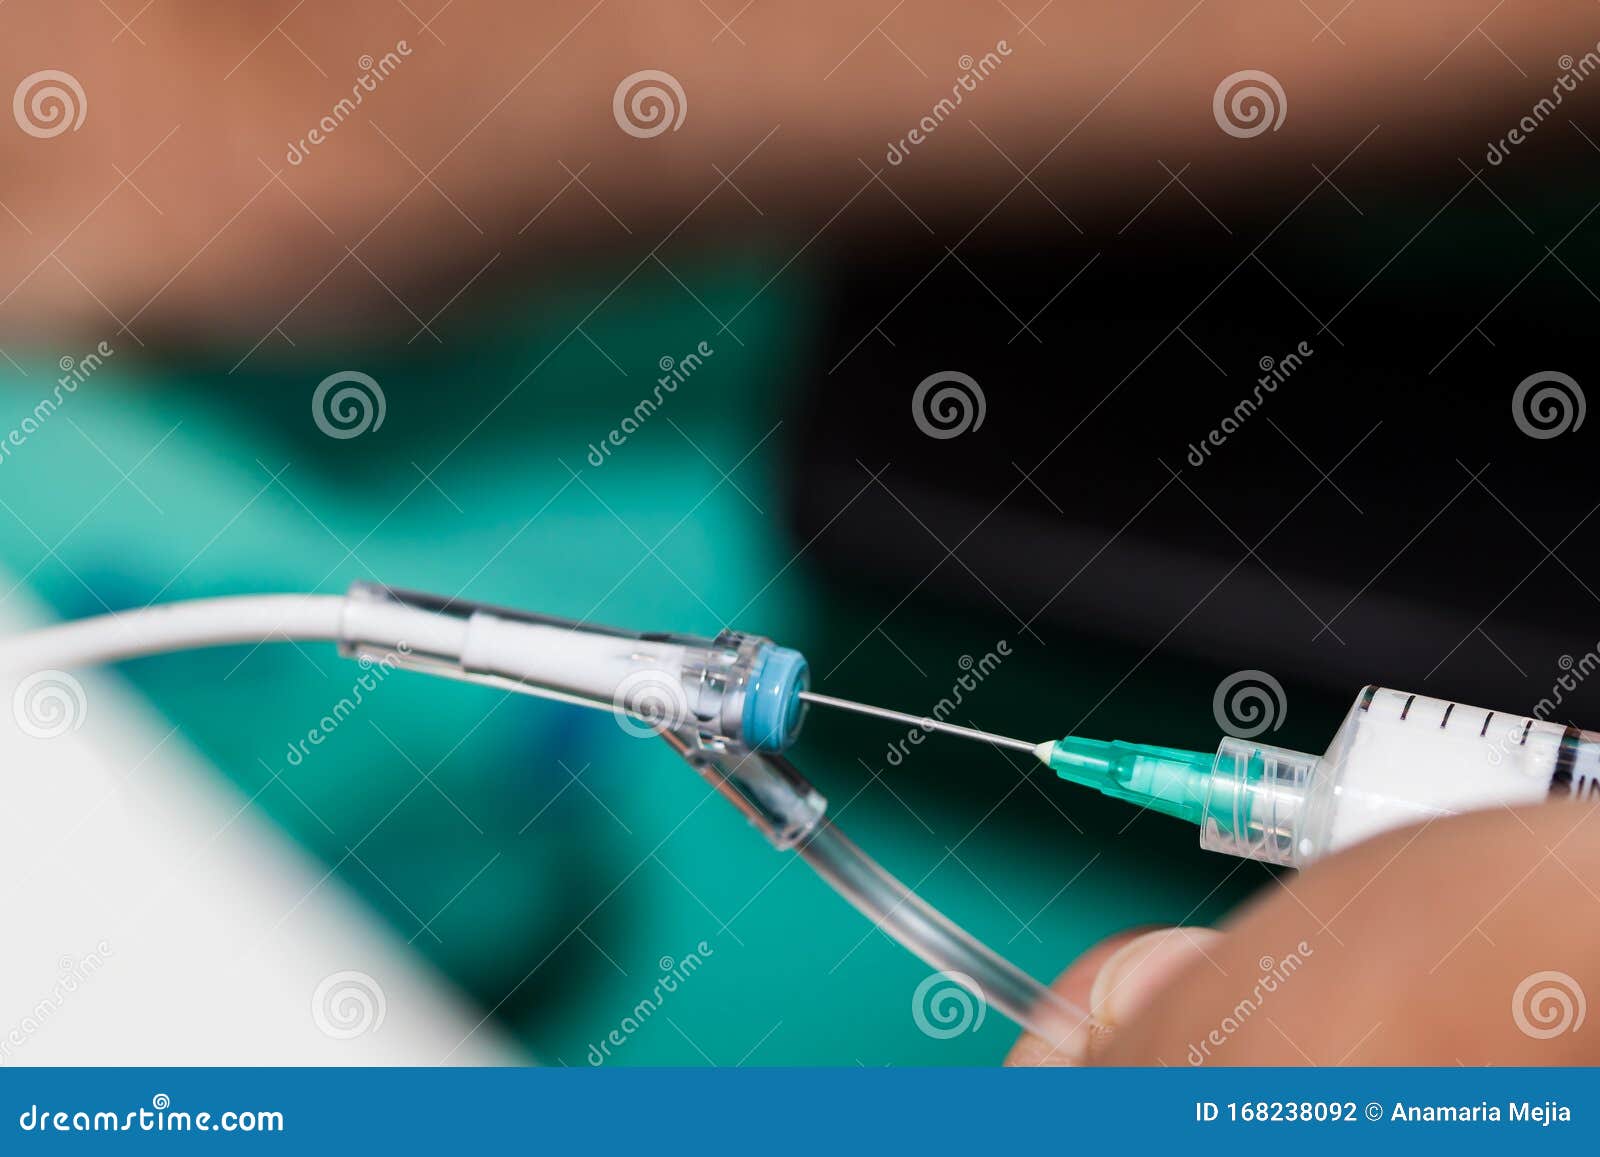 surgical team preparing their patient for surgery, anesthesiologist gives anesthesia to a patient